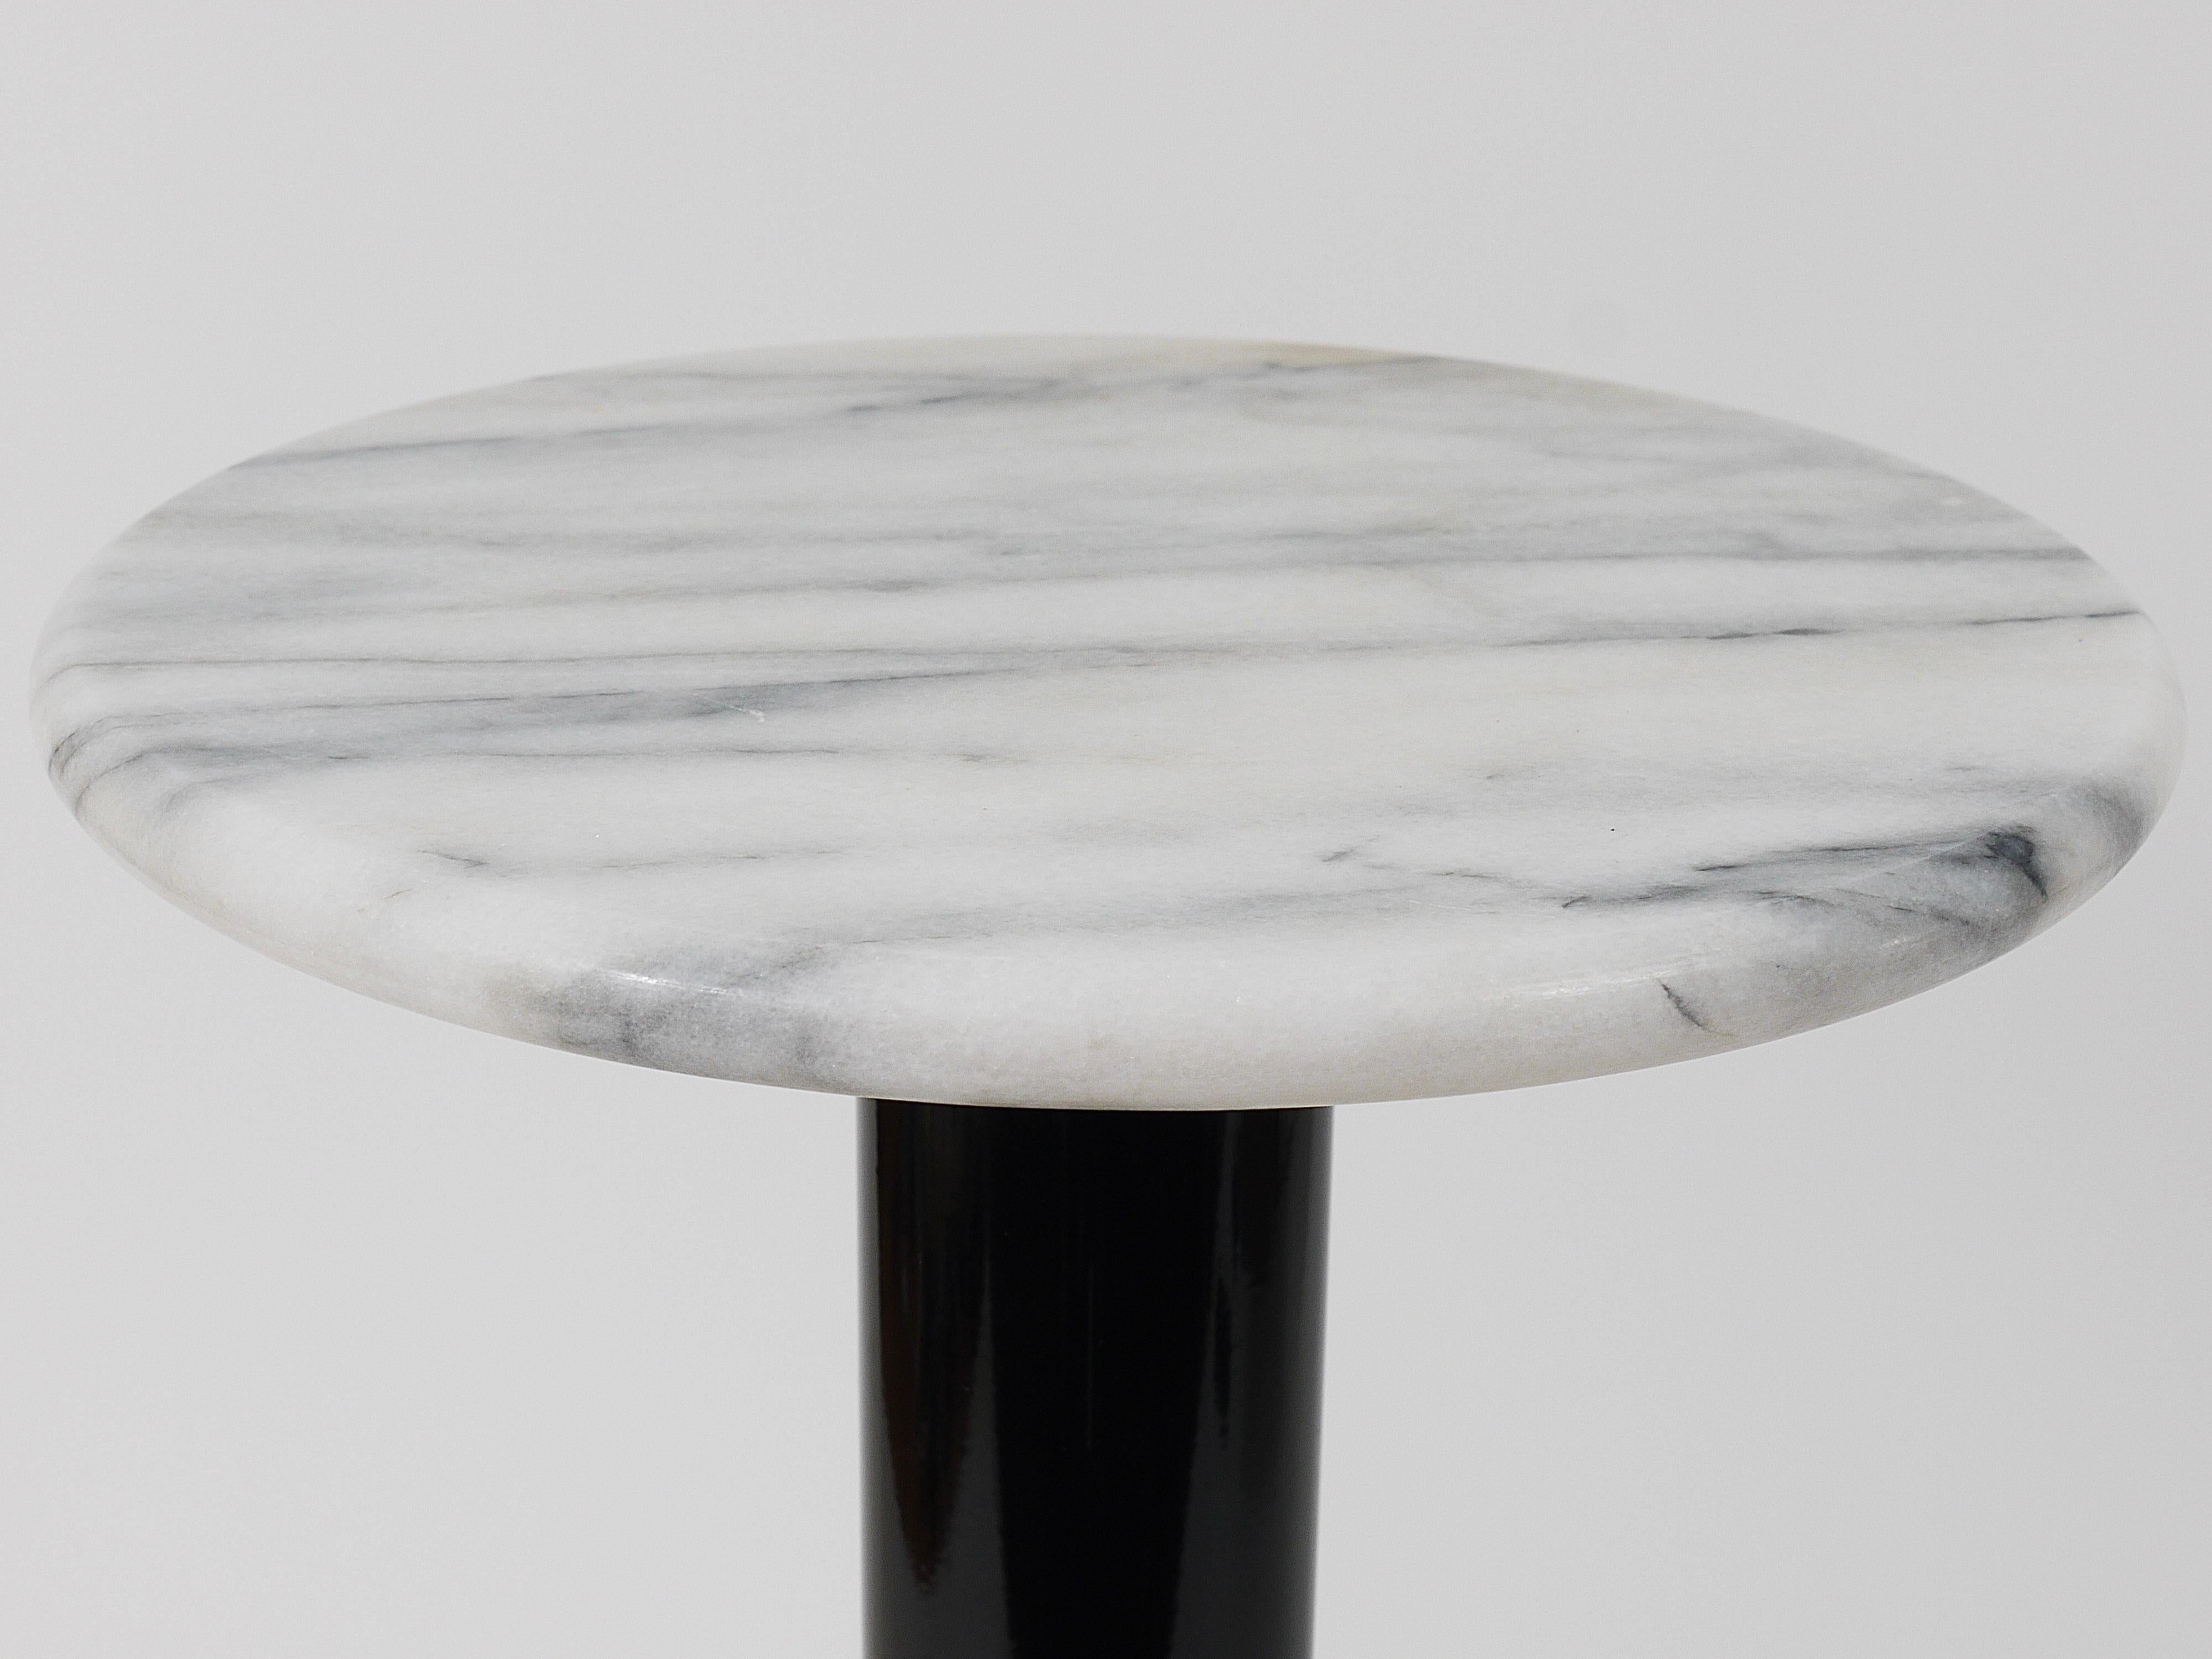 Postmodern White Carrara Marble Flower Stand Pedestal Table, Italy, 1980s For Sale 7